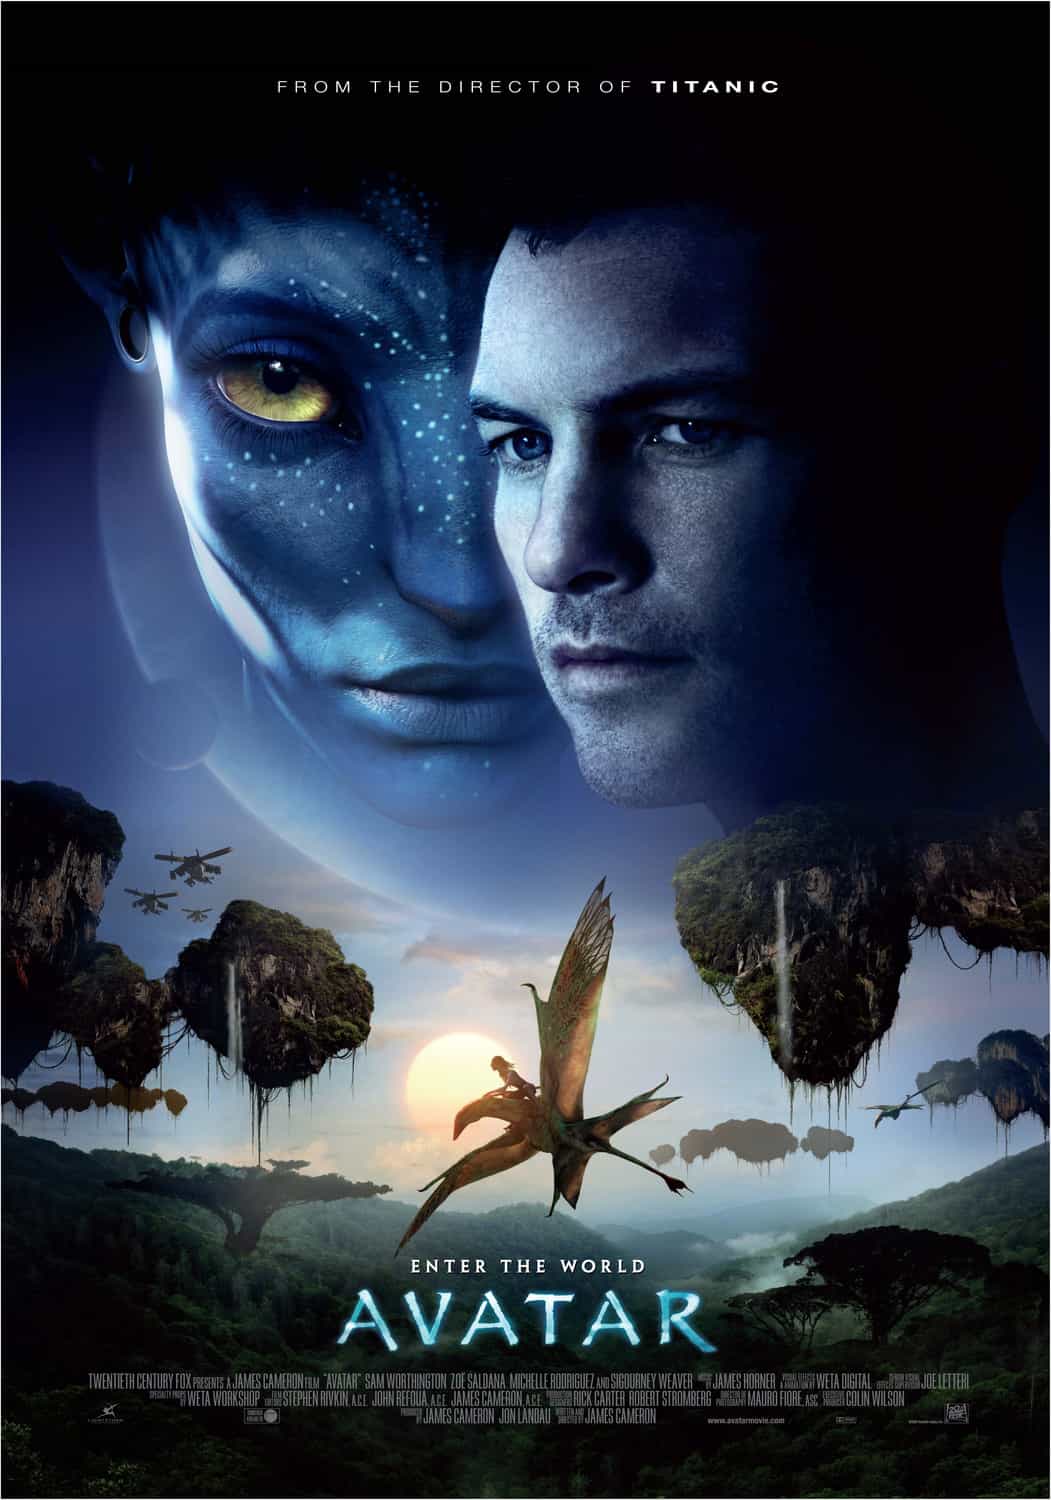 Avatar is top grossing film ever
